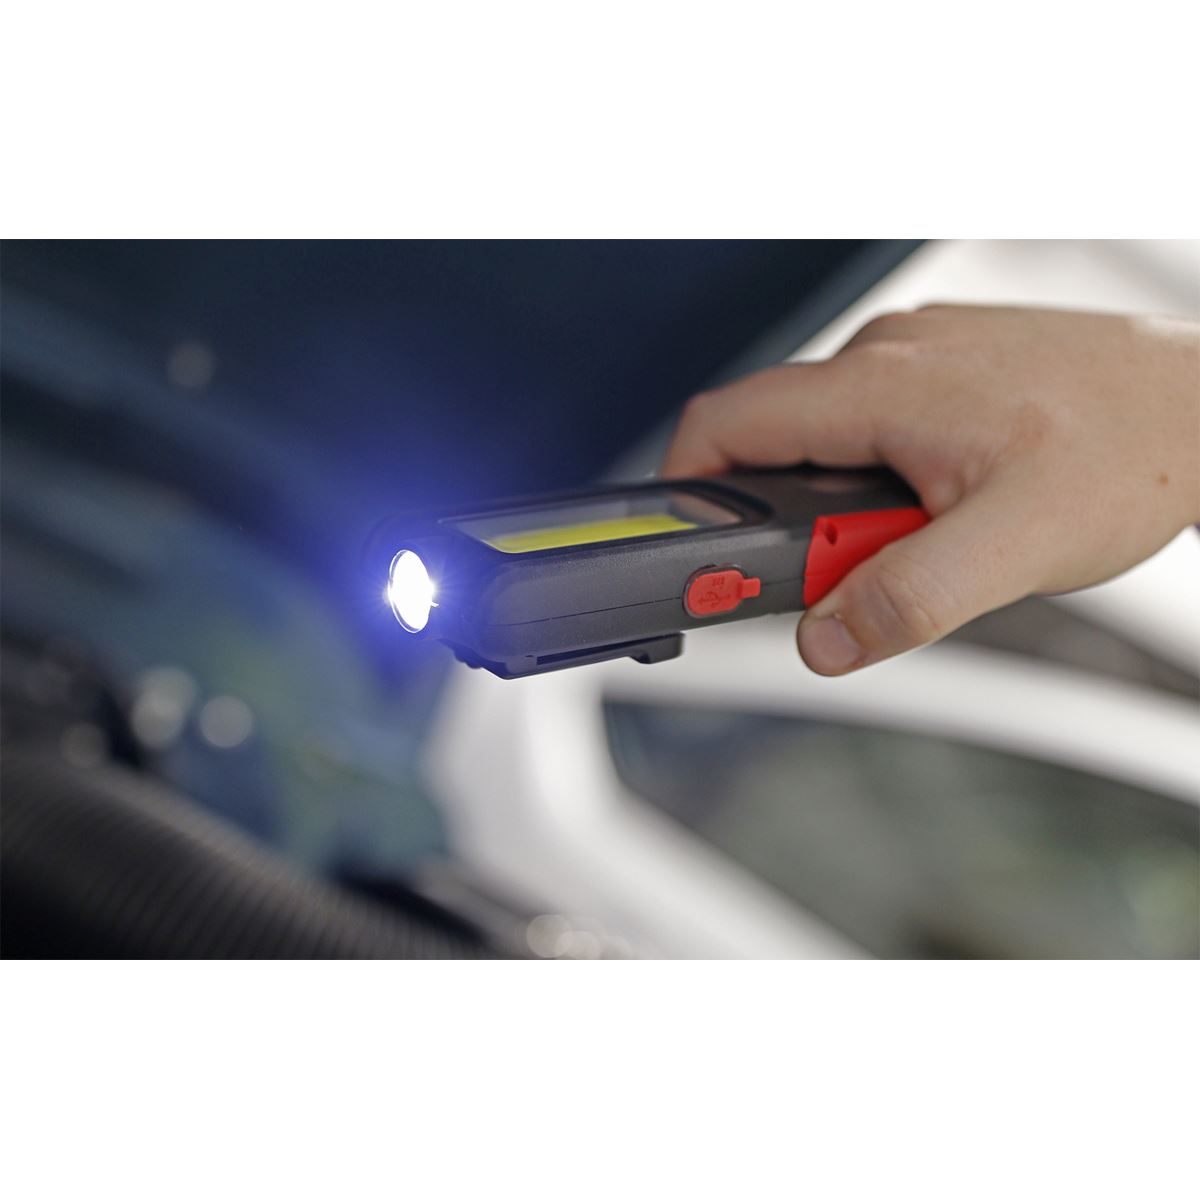 Sealey Rechargeable Inspection Light 5W COB & 3W SMD LED with Power Bank - Red